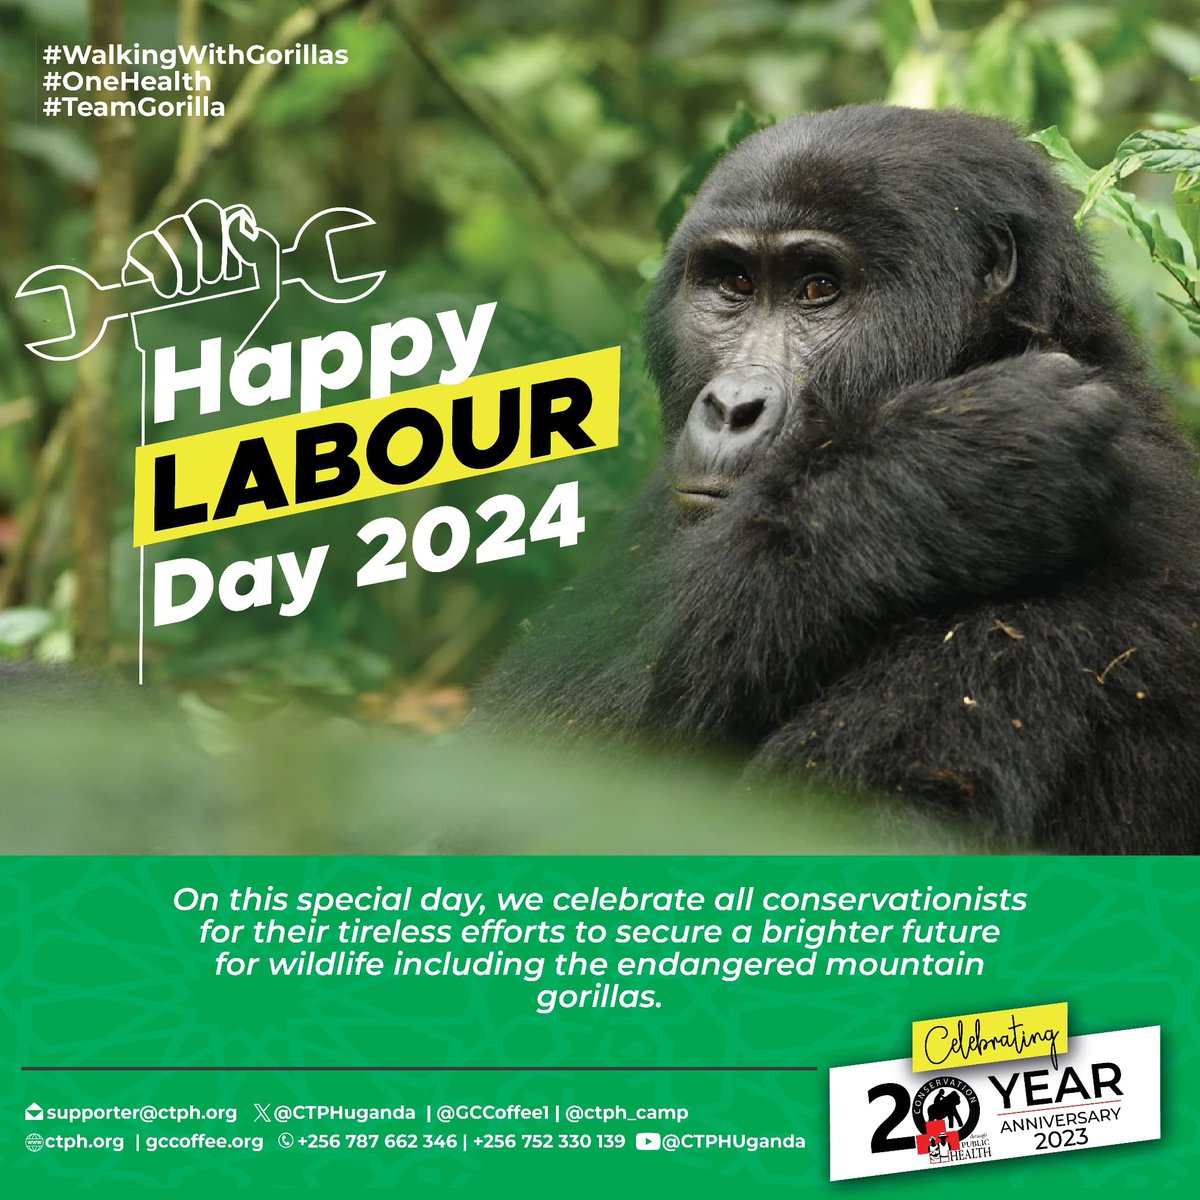 Happy Labour Day. Today, we salute all the brave and hard-working conservationists that have worked so hard over the years to achieve a bright future for our wildlife. #OneHealth #WalkingWithGorillas